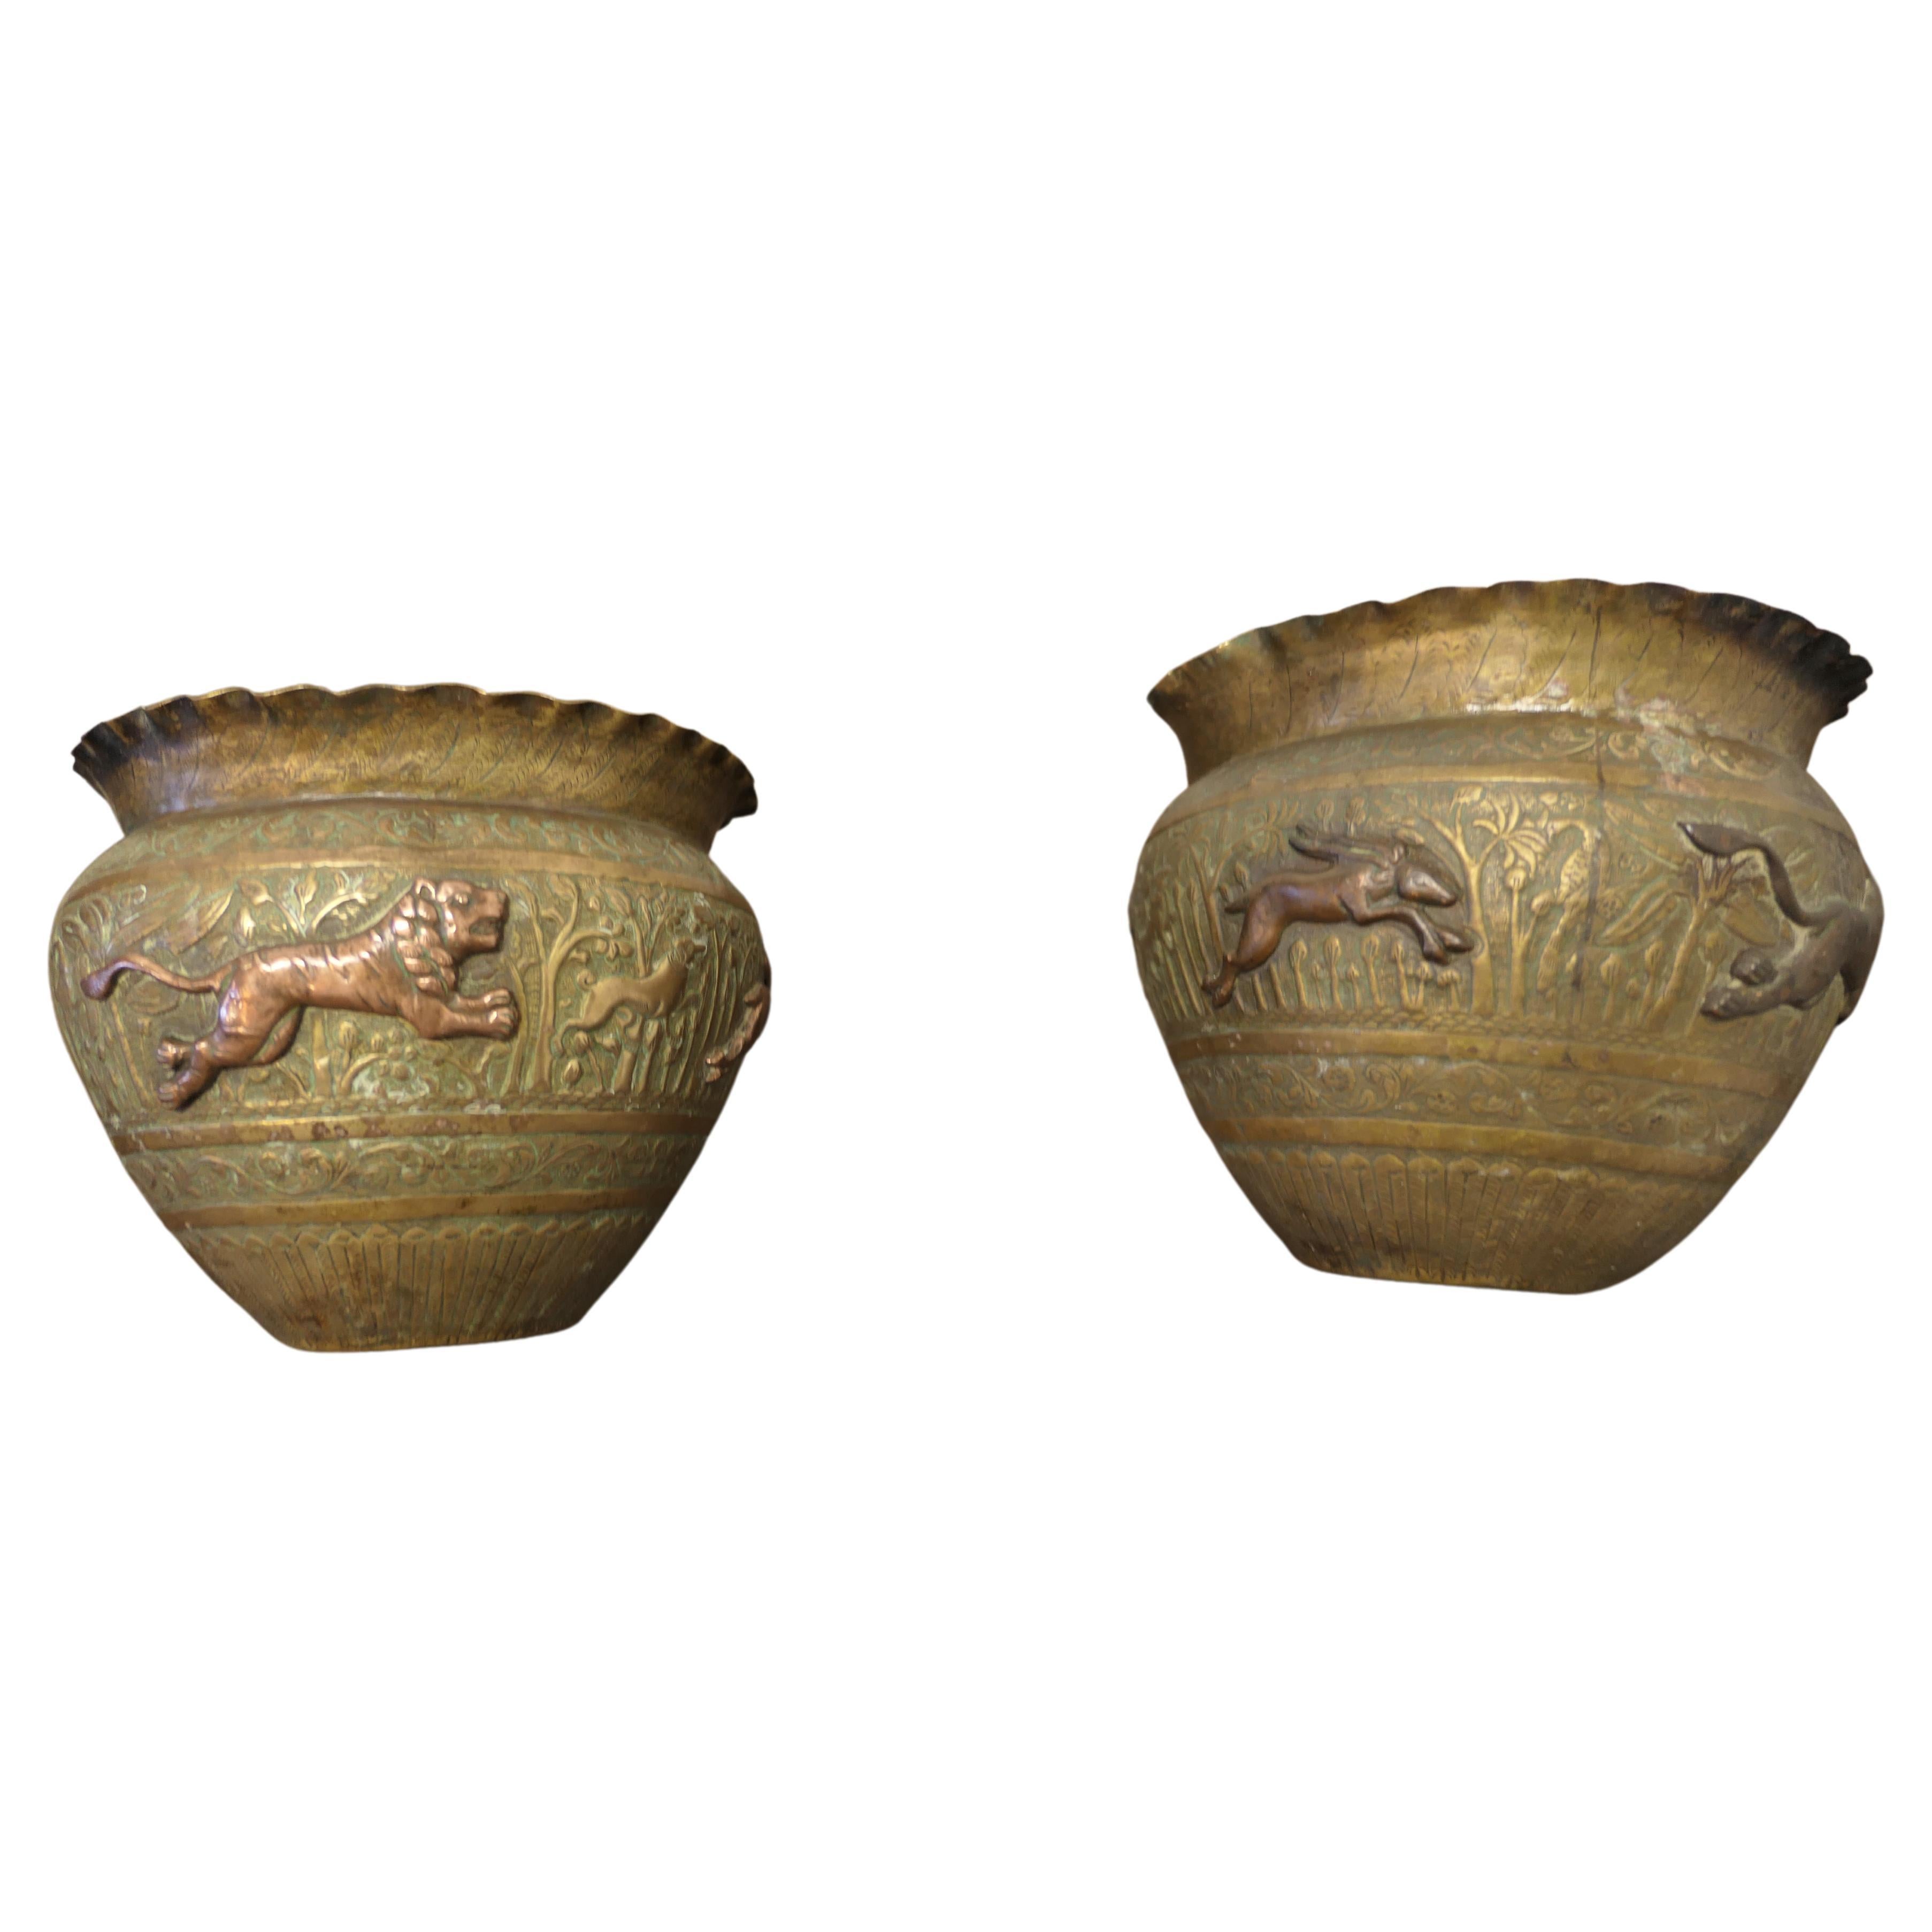 A pair of 19th century North African brass and copper Jardiniere pots

These are superb hand made pieces, they are embossed and decorated with lively copper animals 
The pots have a waved collar
The pots are wonderful looking pieces with natural